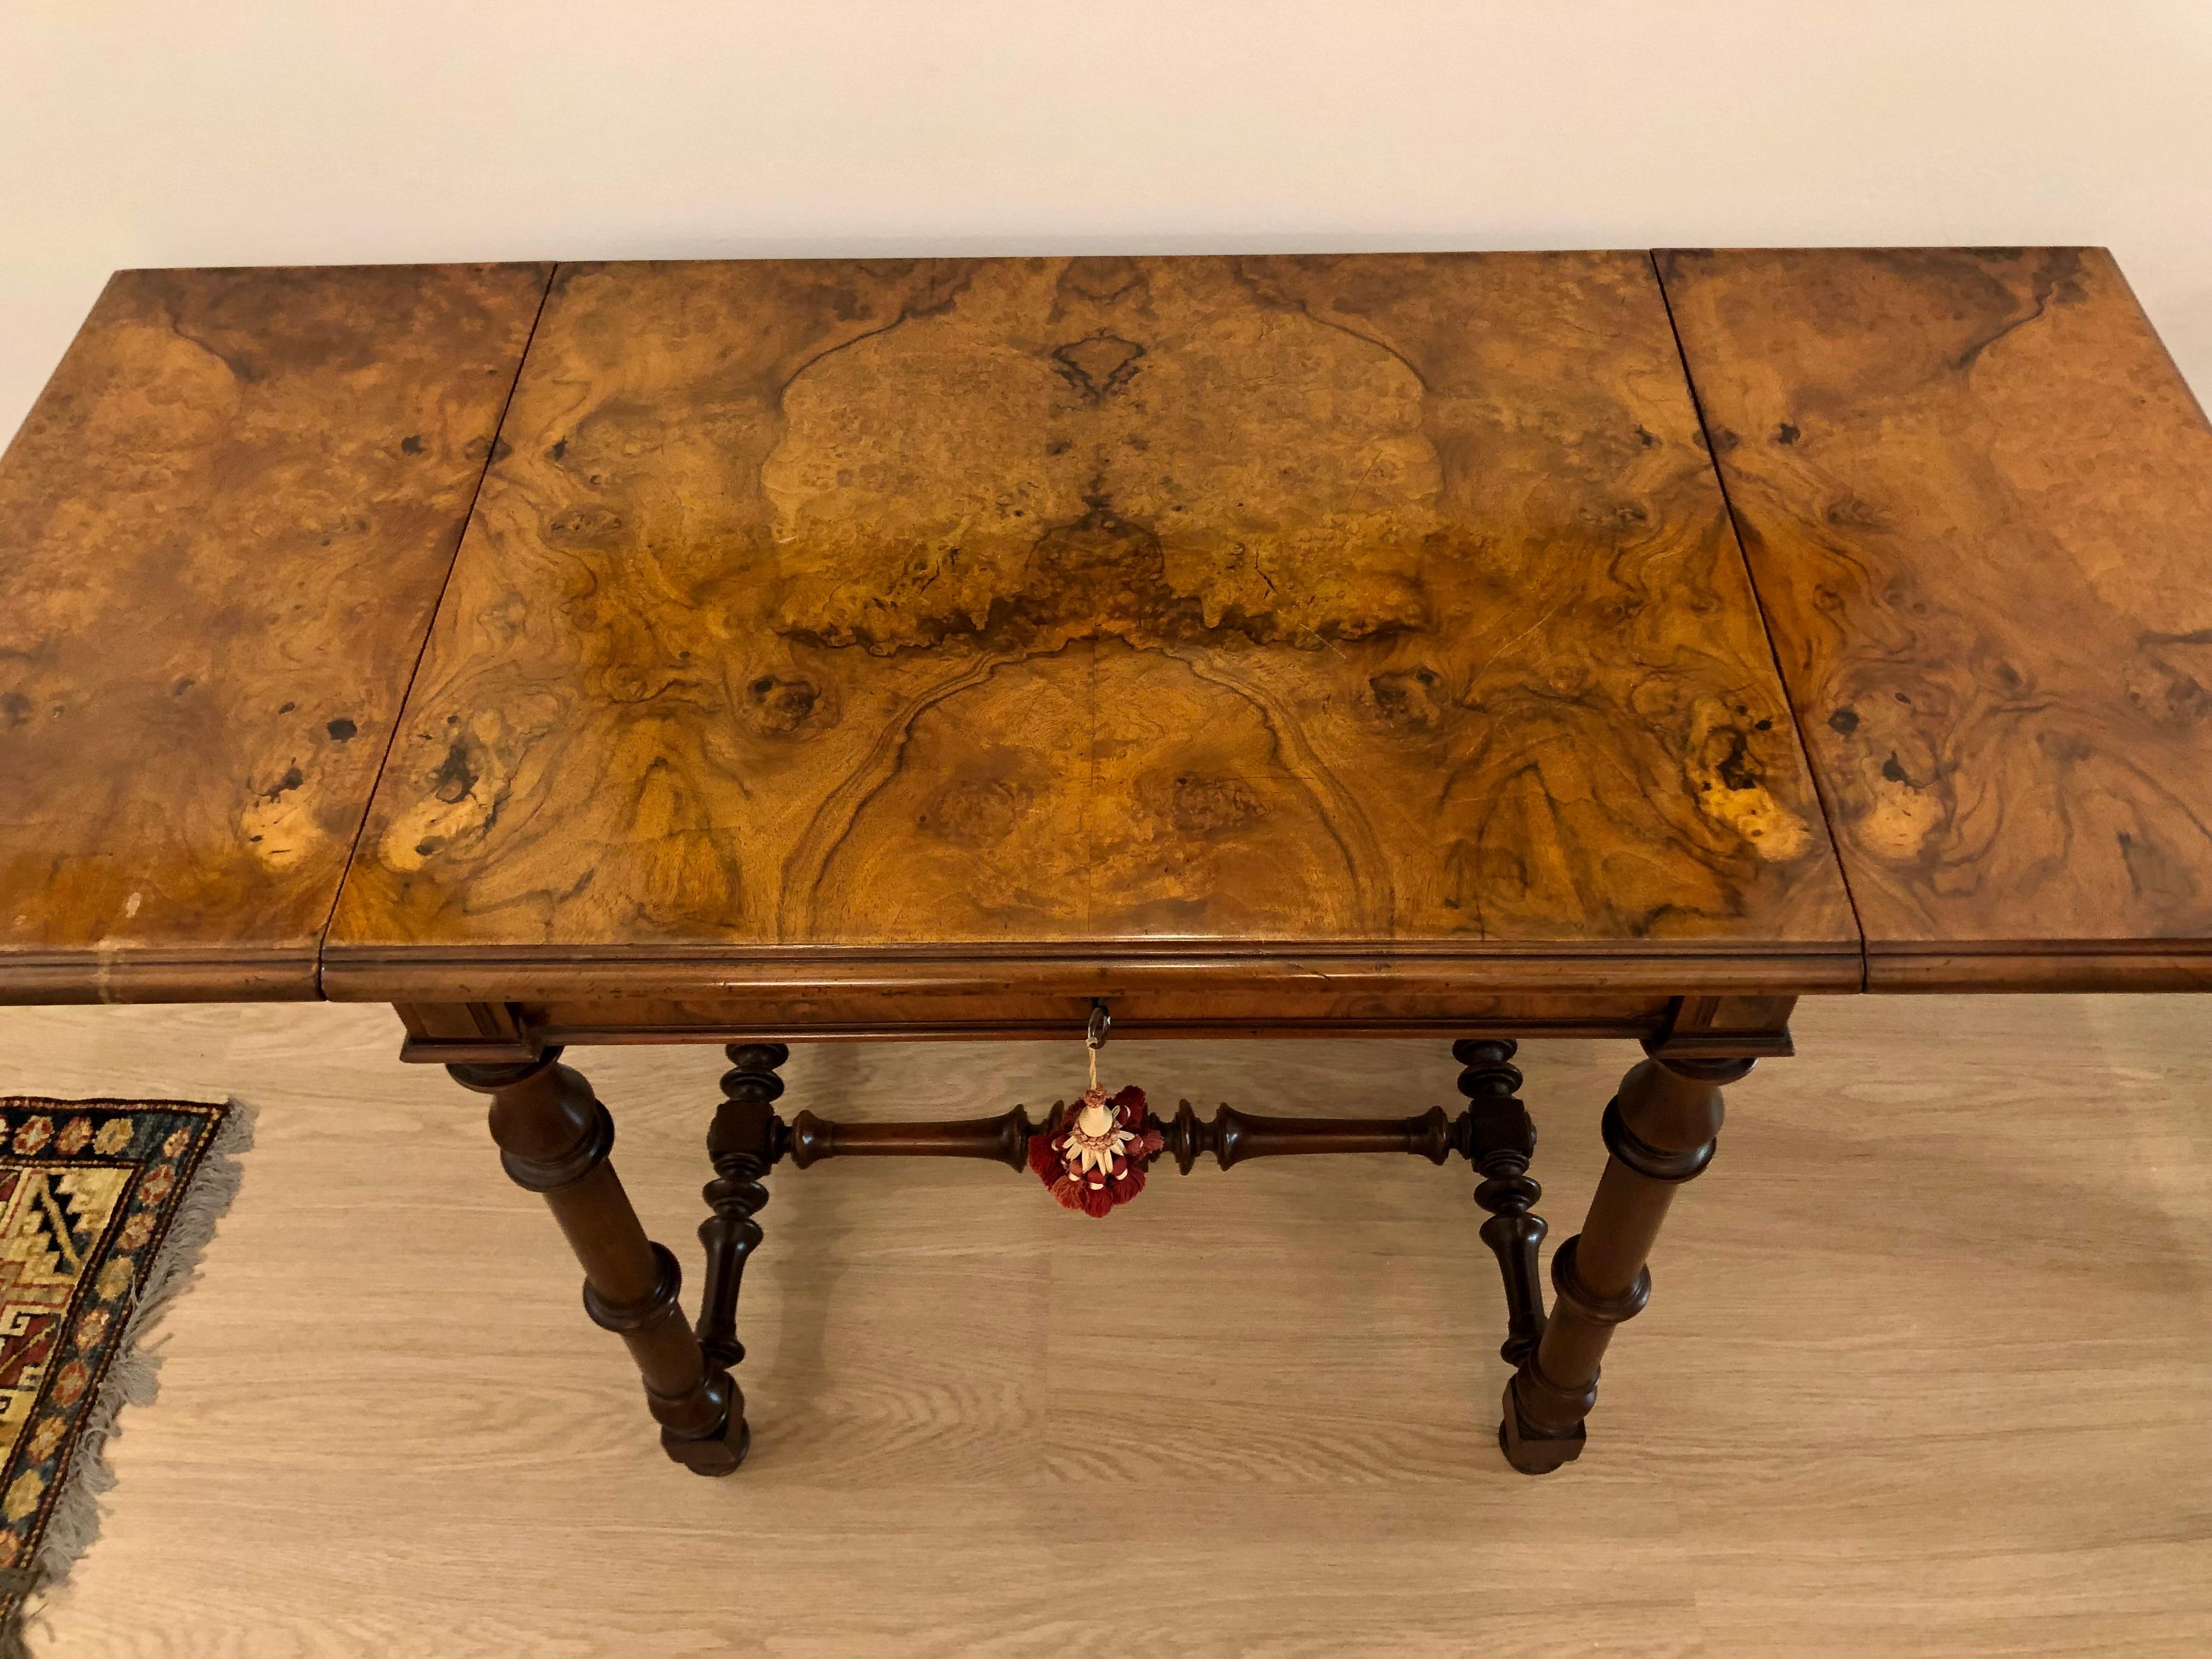 A small, burled walnut table with two drop leaves and a single pull drawer. The table is raised on turned legs with an H form stretcher.  This piece has a gorgeous patina and bookmarked veneer. The lines are simple but the craftsmanship is